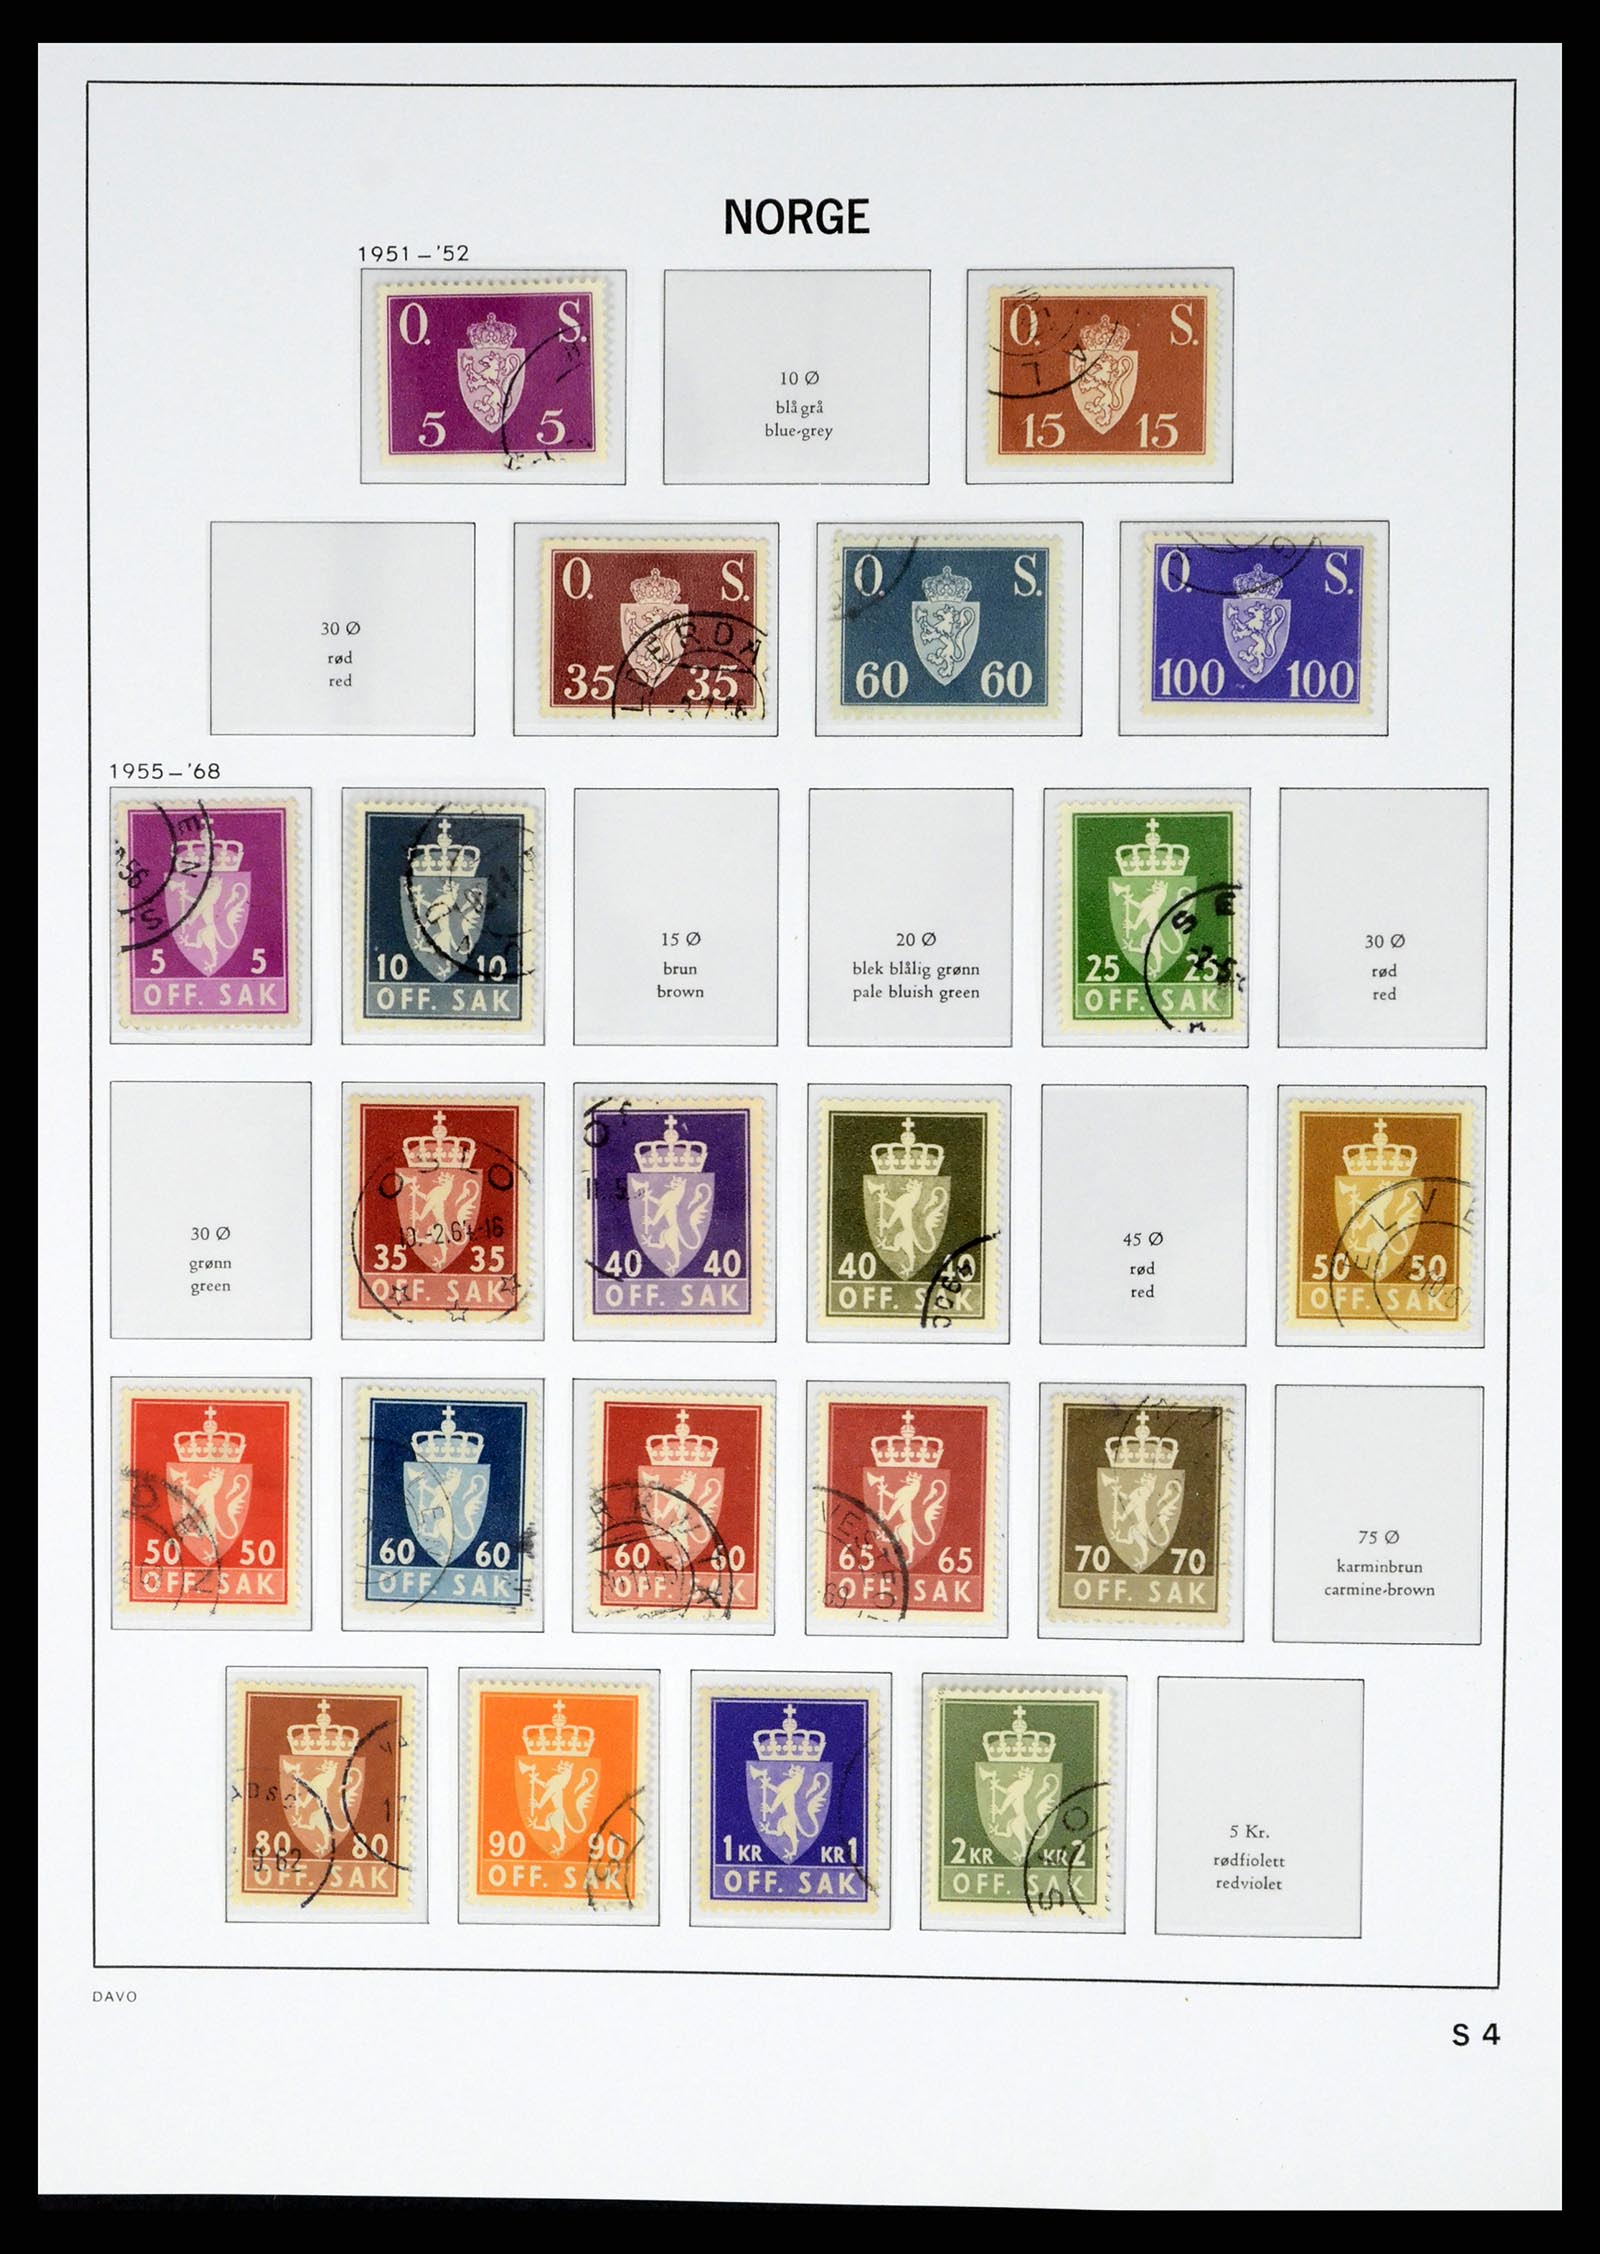 37381 043 - Stamp collection 37381 Norway 1855-1969.